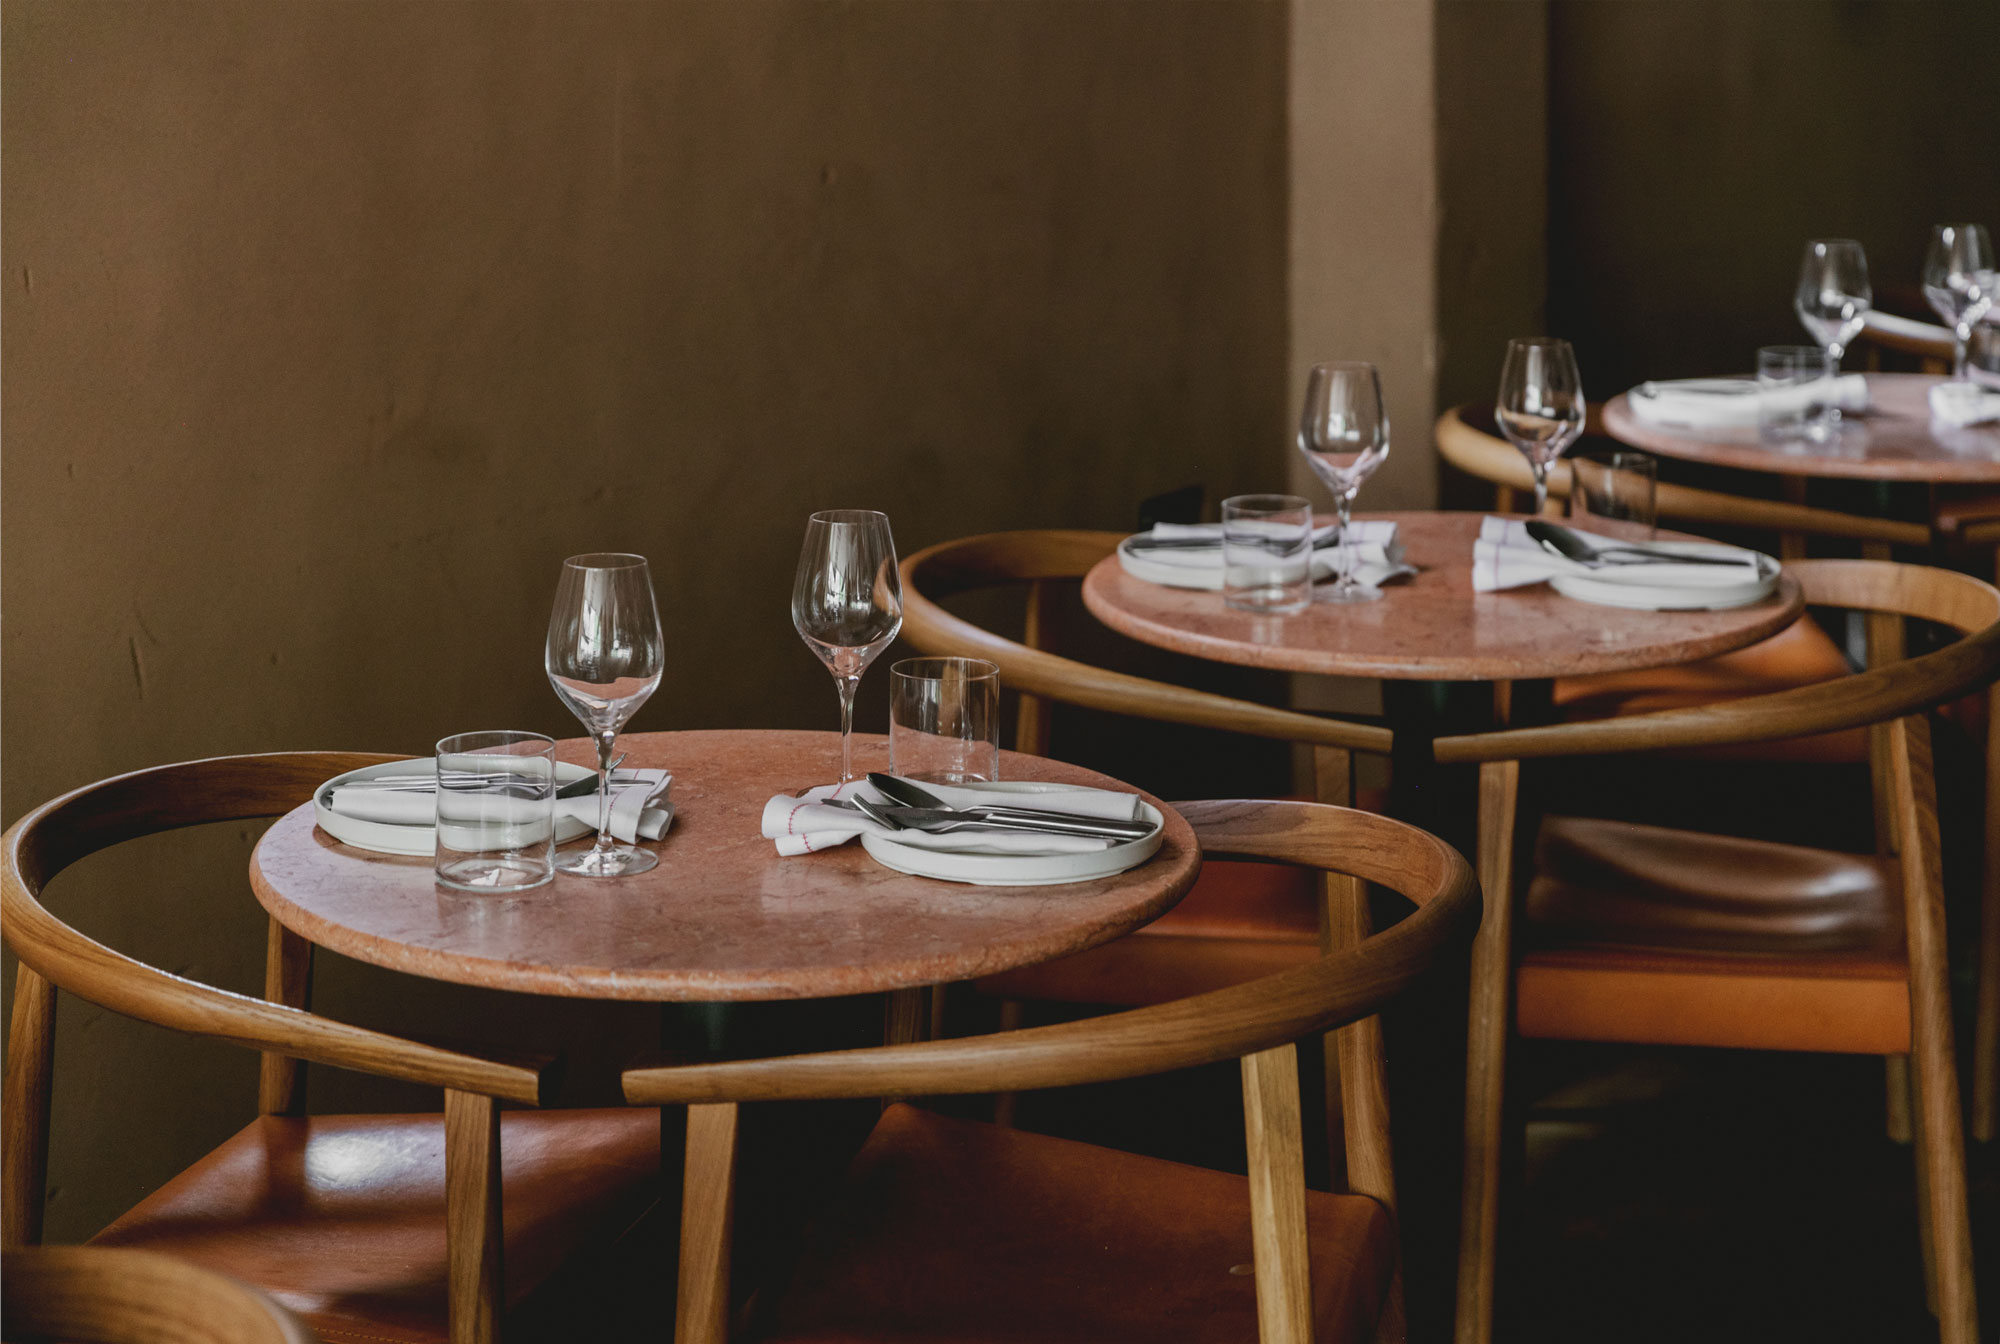 Round oak dining table and chairs in Manteca restaurant